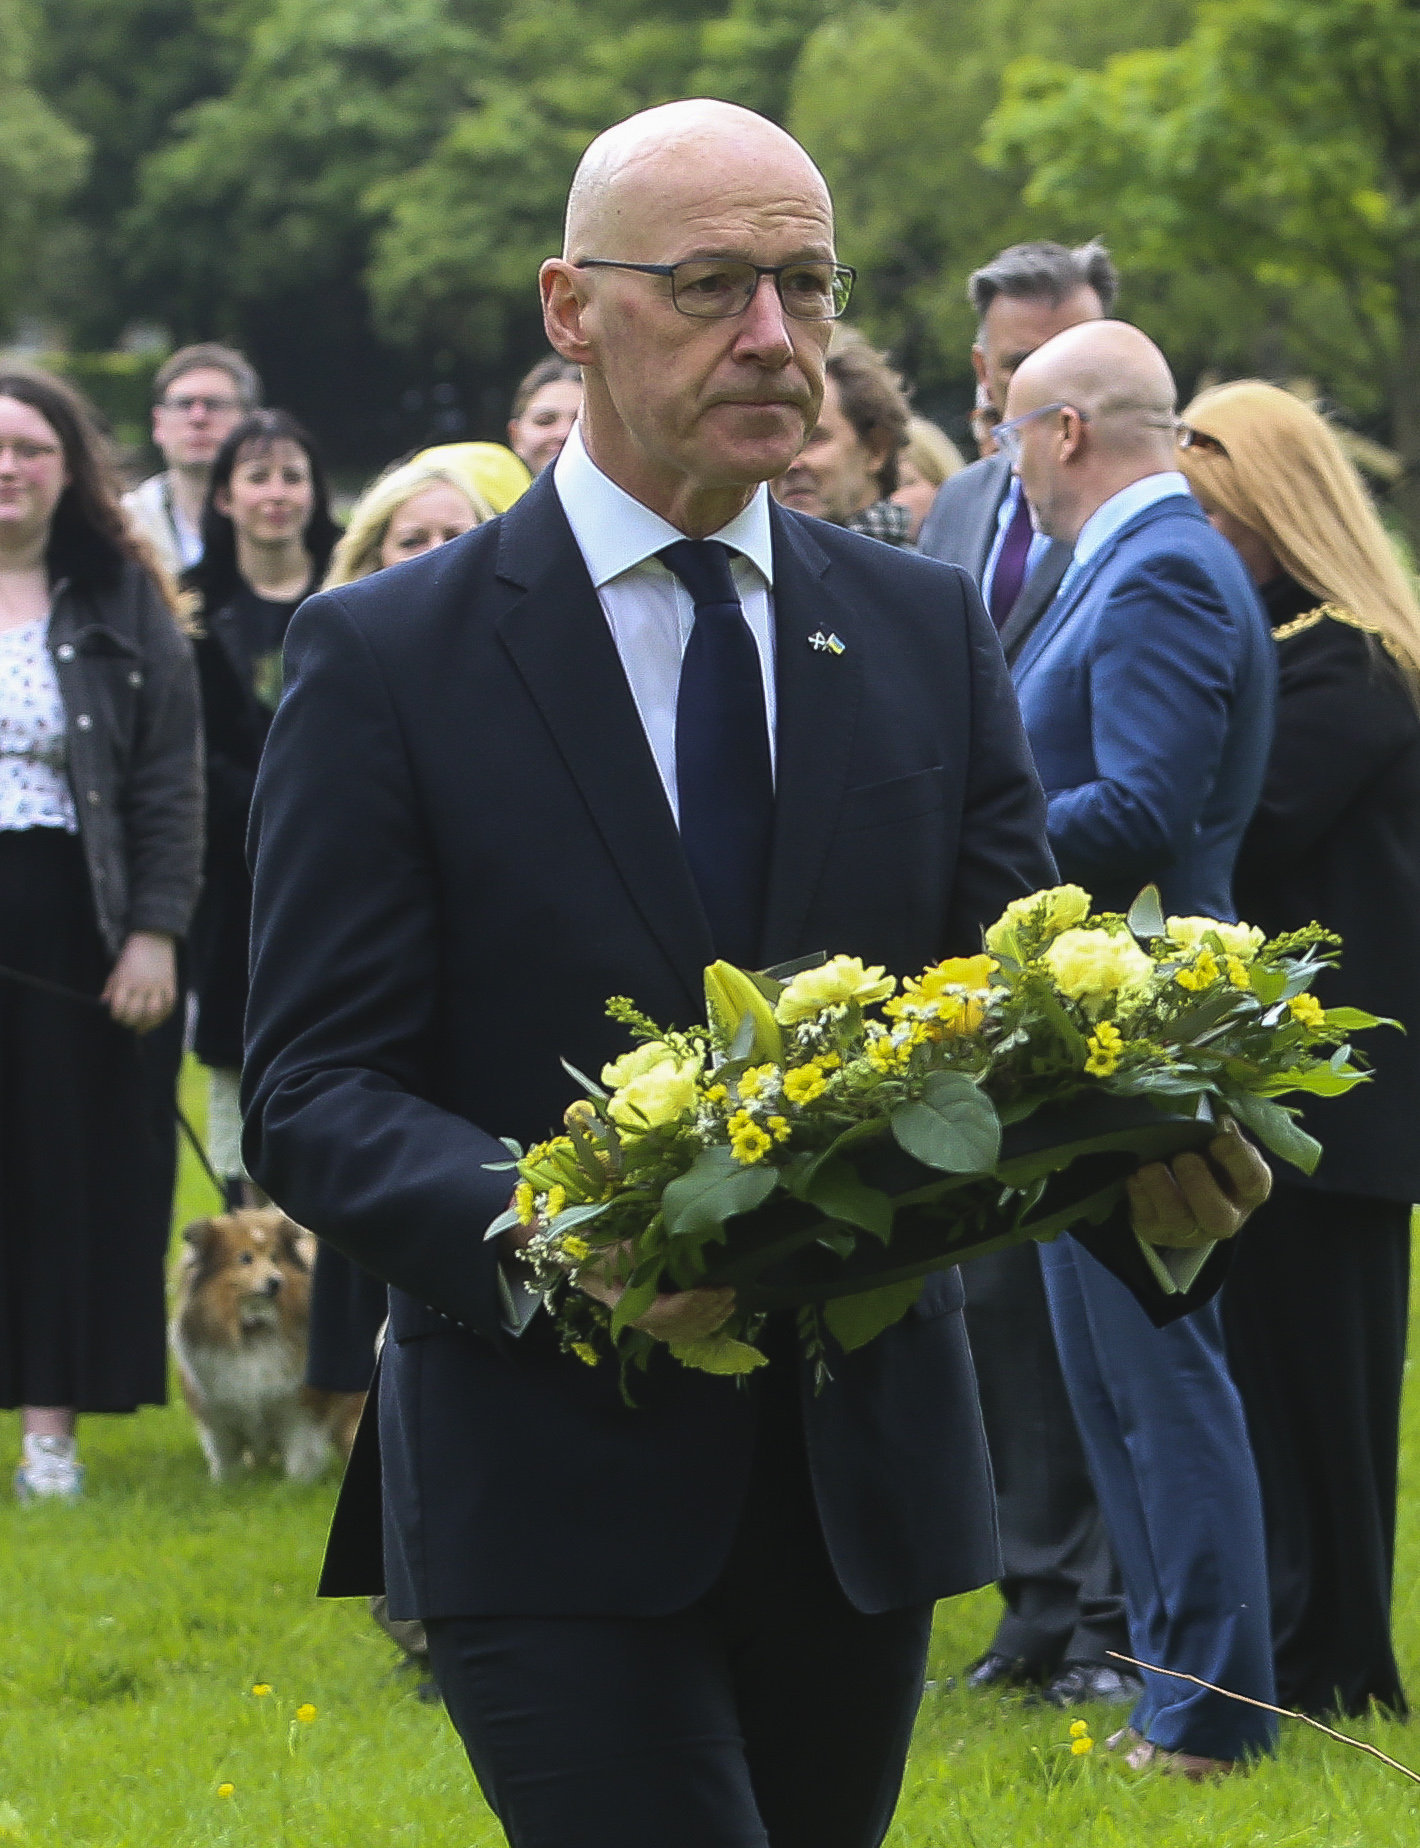 Deputy First Minister John Swinney laid a wreath and joined families on a walk at the opening of Scotlands Covid Memorial, a campaign initiated and led by The Herald